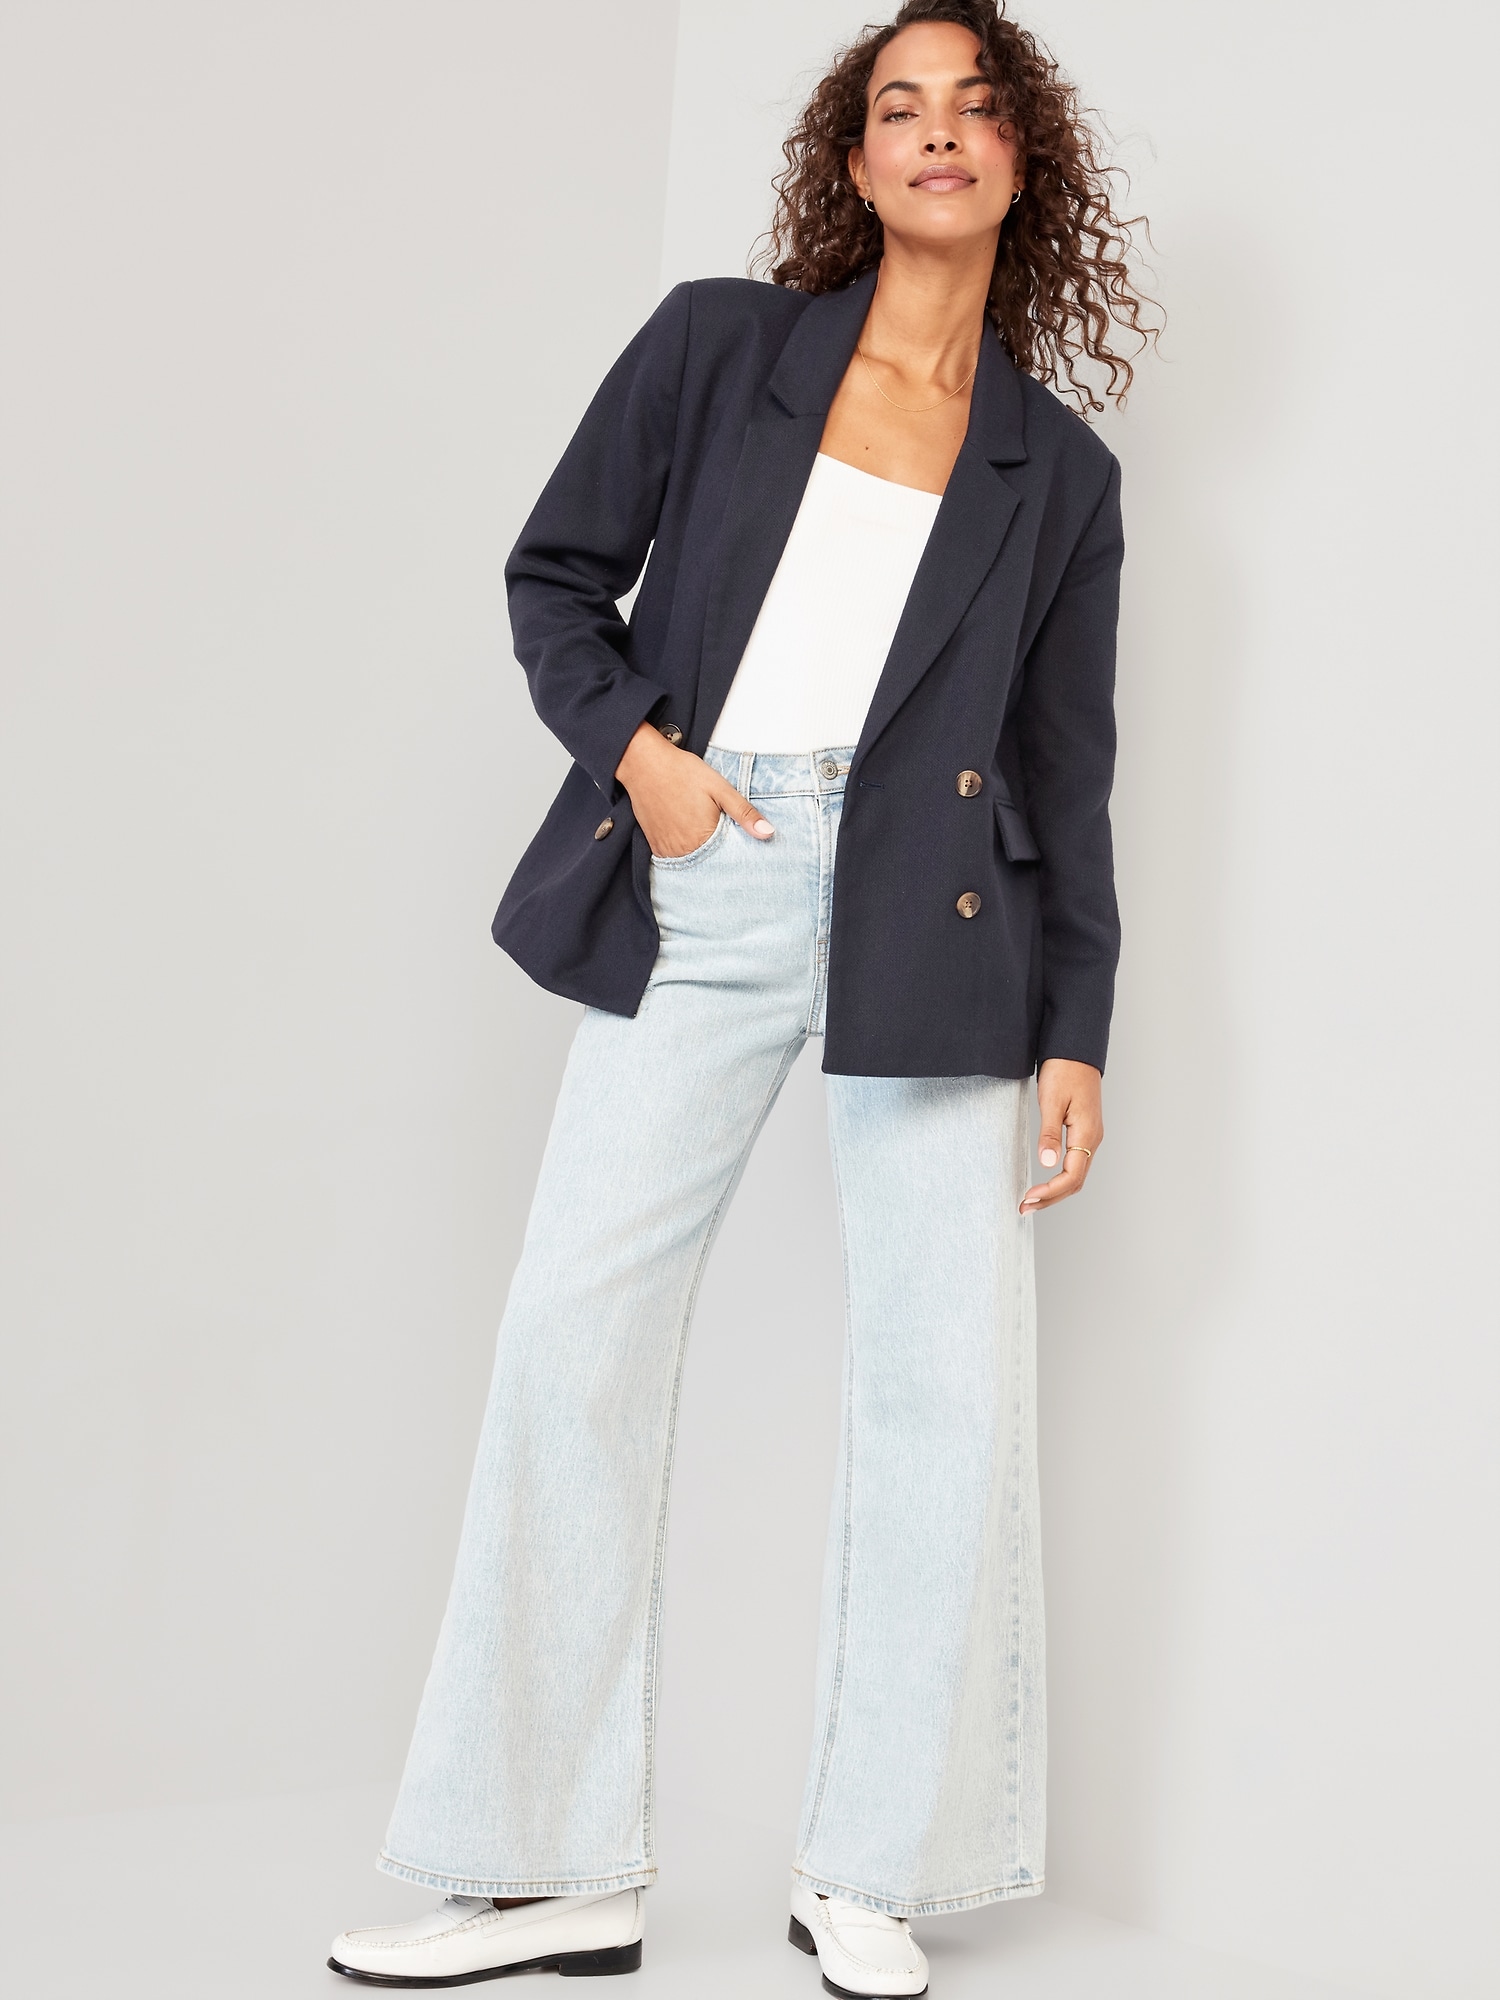 Double-Breasted Textured Blazer for Women | Old Navy